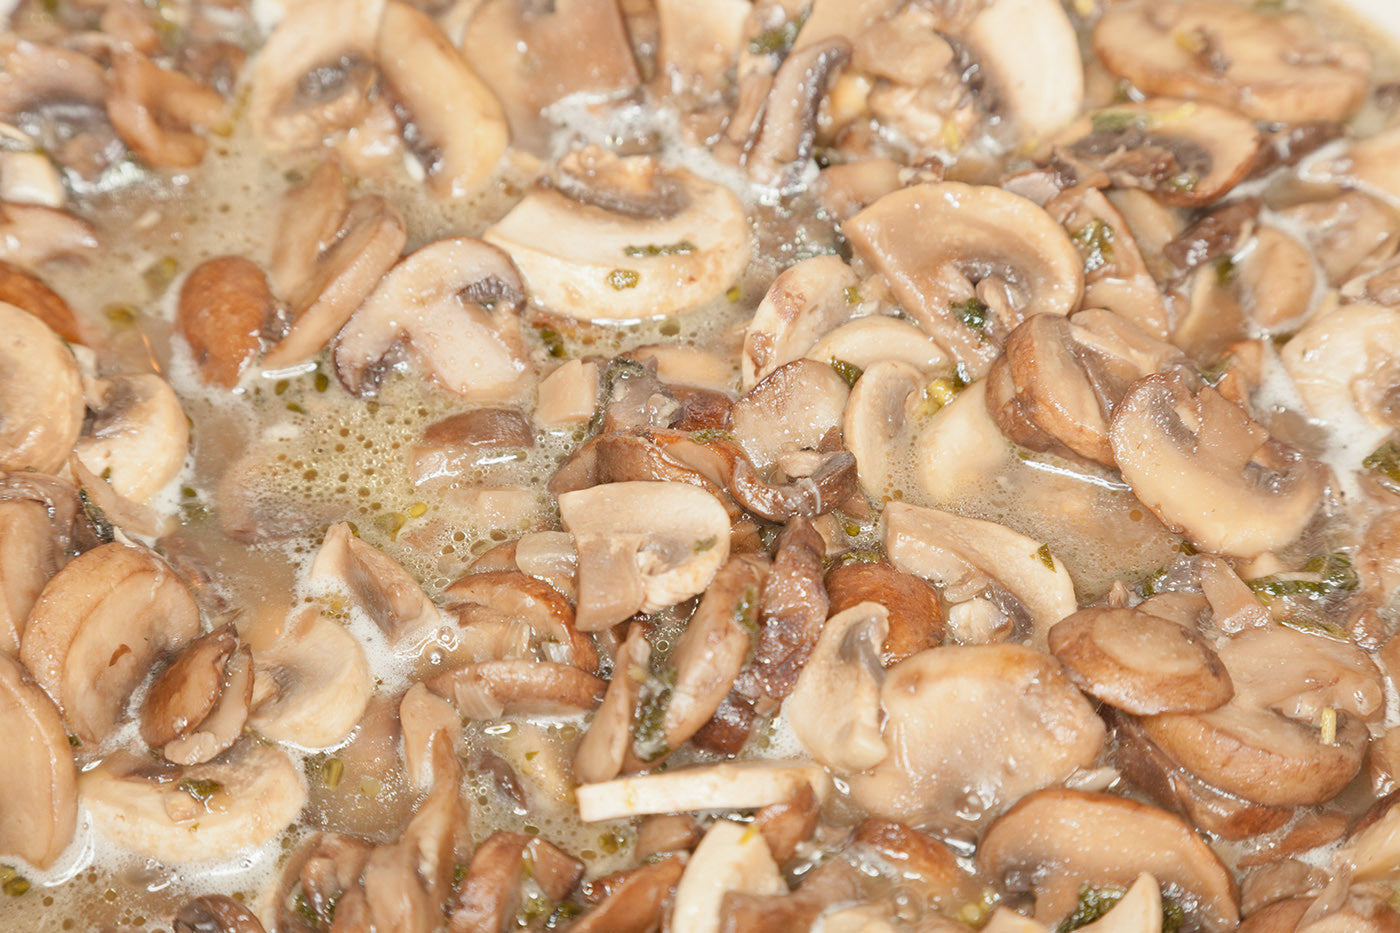 Make Your Own Nutrient Dense Mushroom Broth with VitaClay!